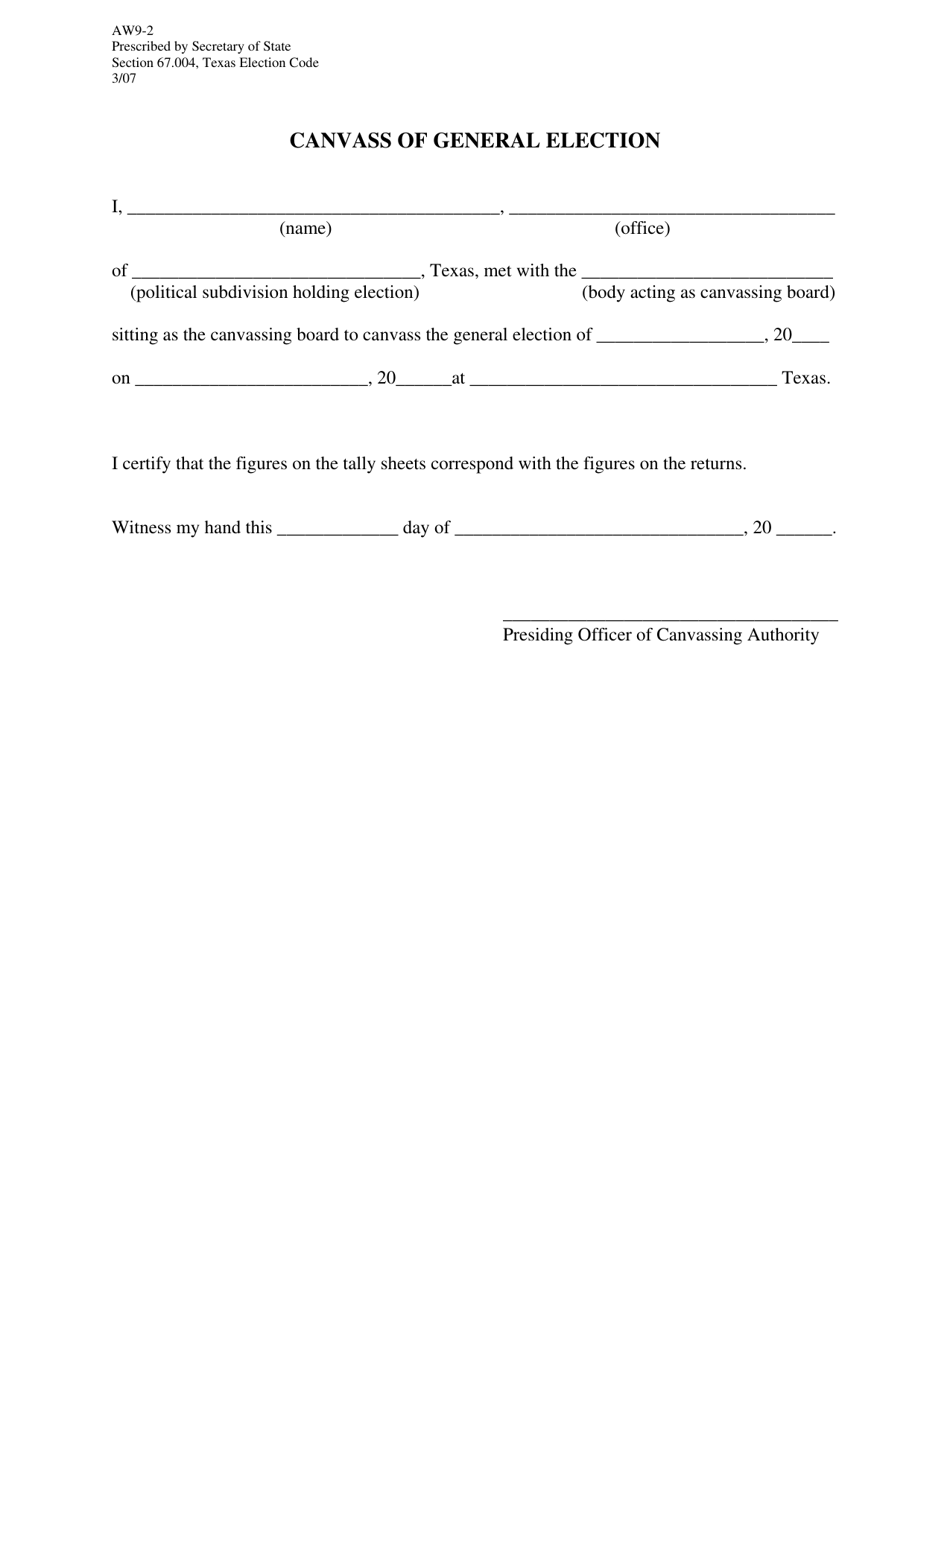 Form AW9-2 Canvass of General Election - Texas, Page 1